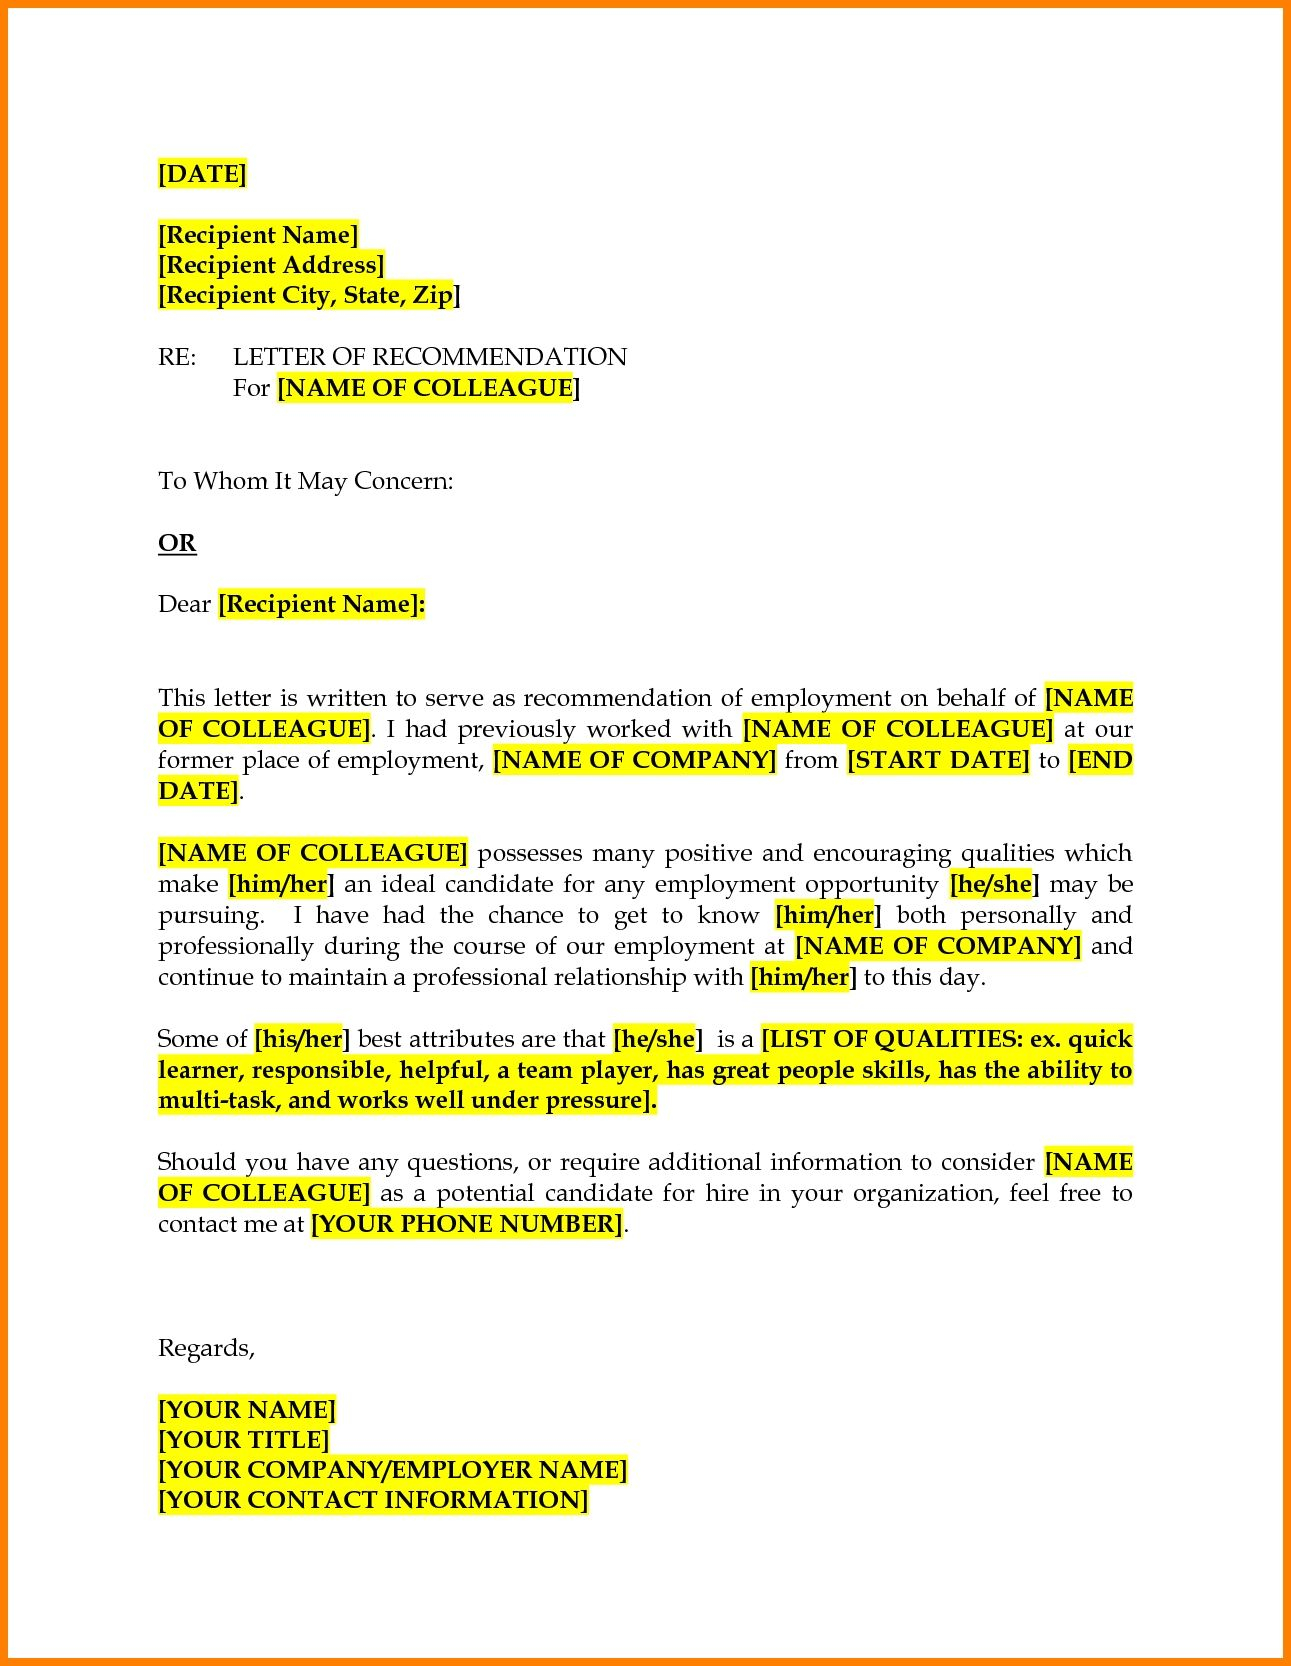 Colleague Recommendation Letter Barebearsbackyardco With in proportions 1291 X 1666